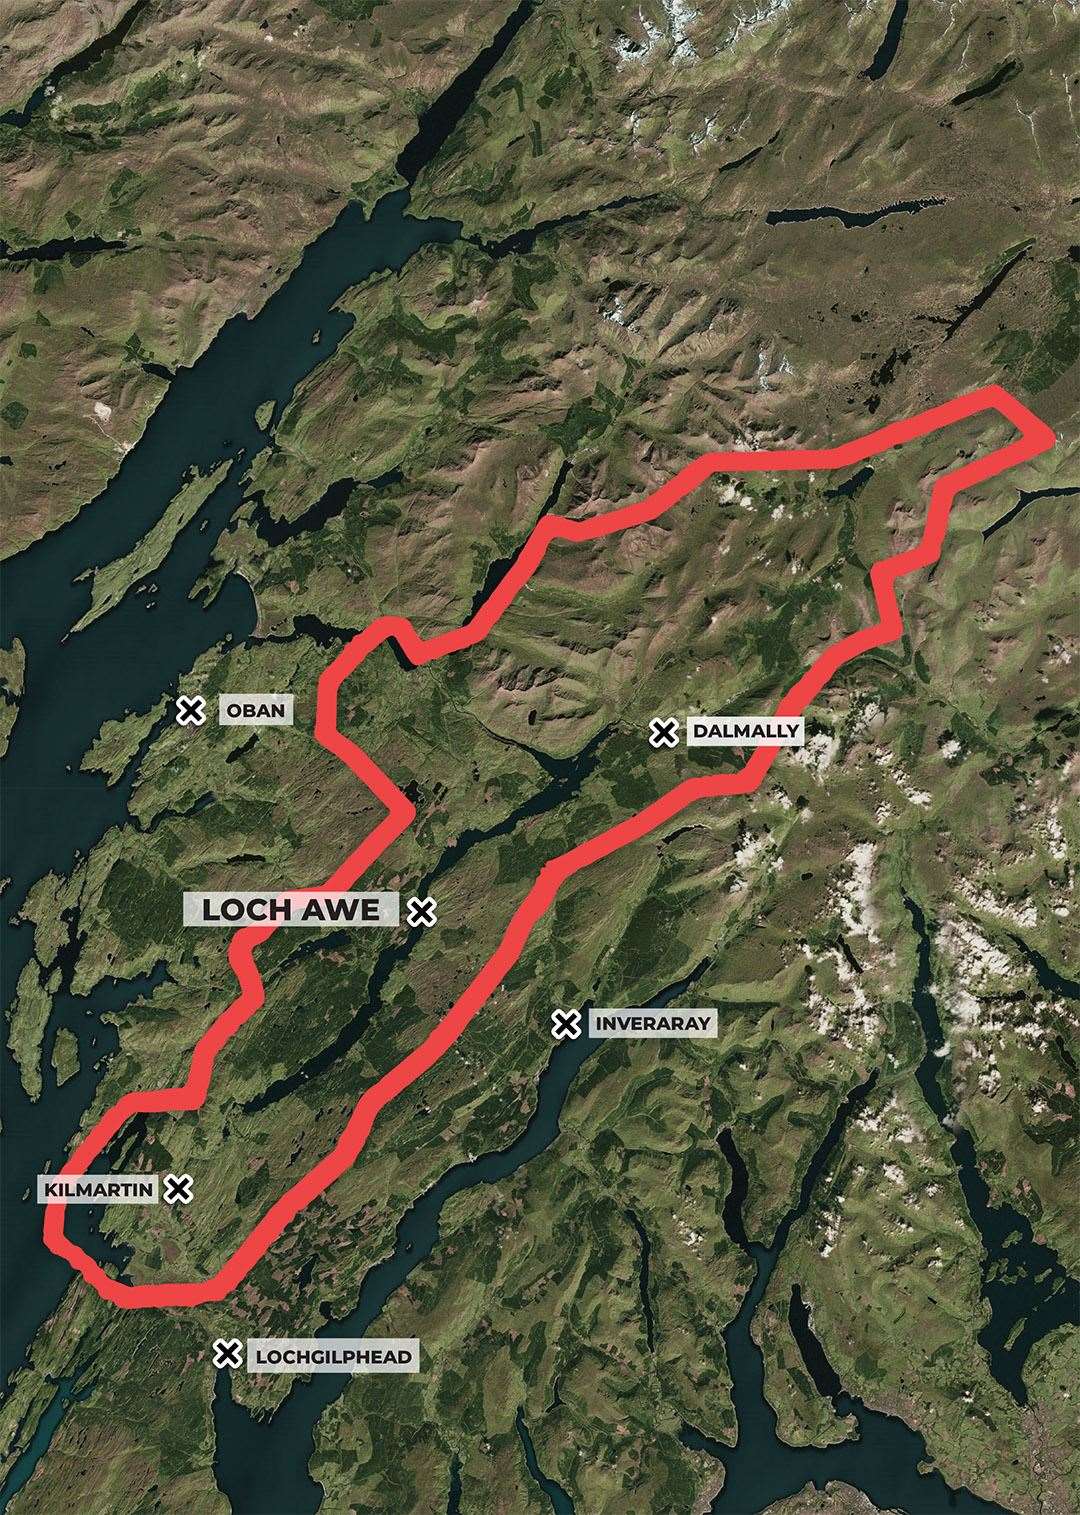 Loch Awe could become a National Park